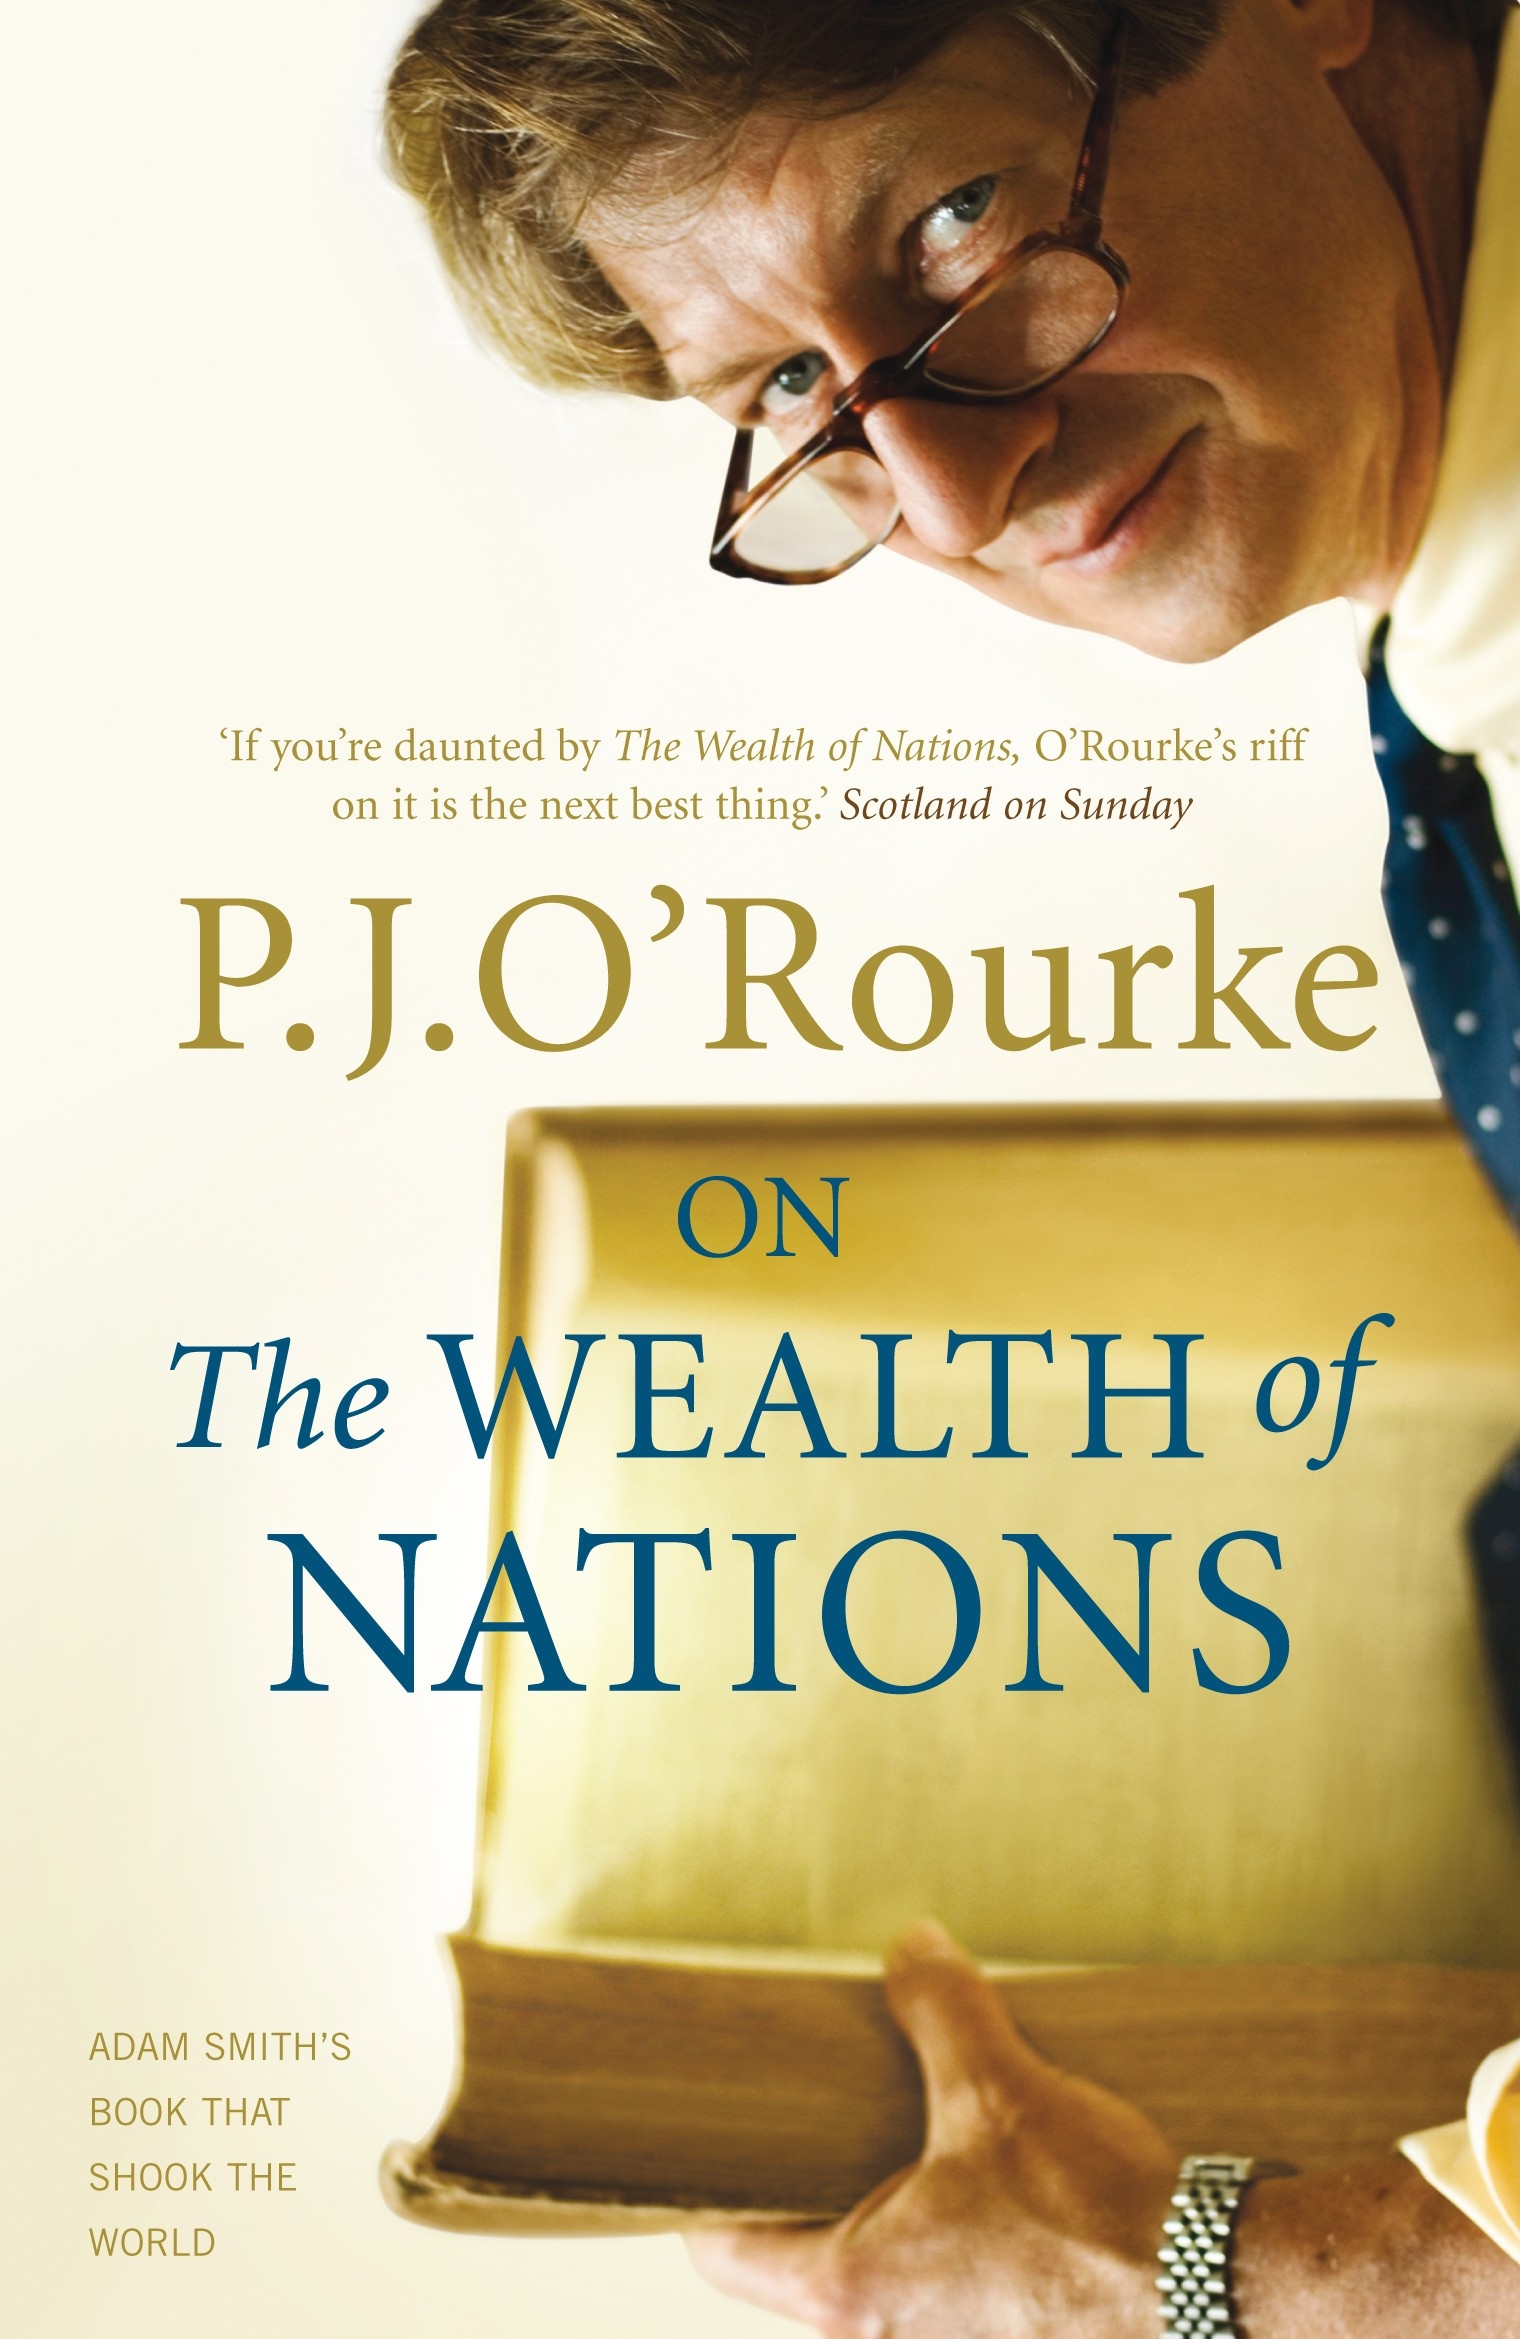 On The Wealth of Nations